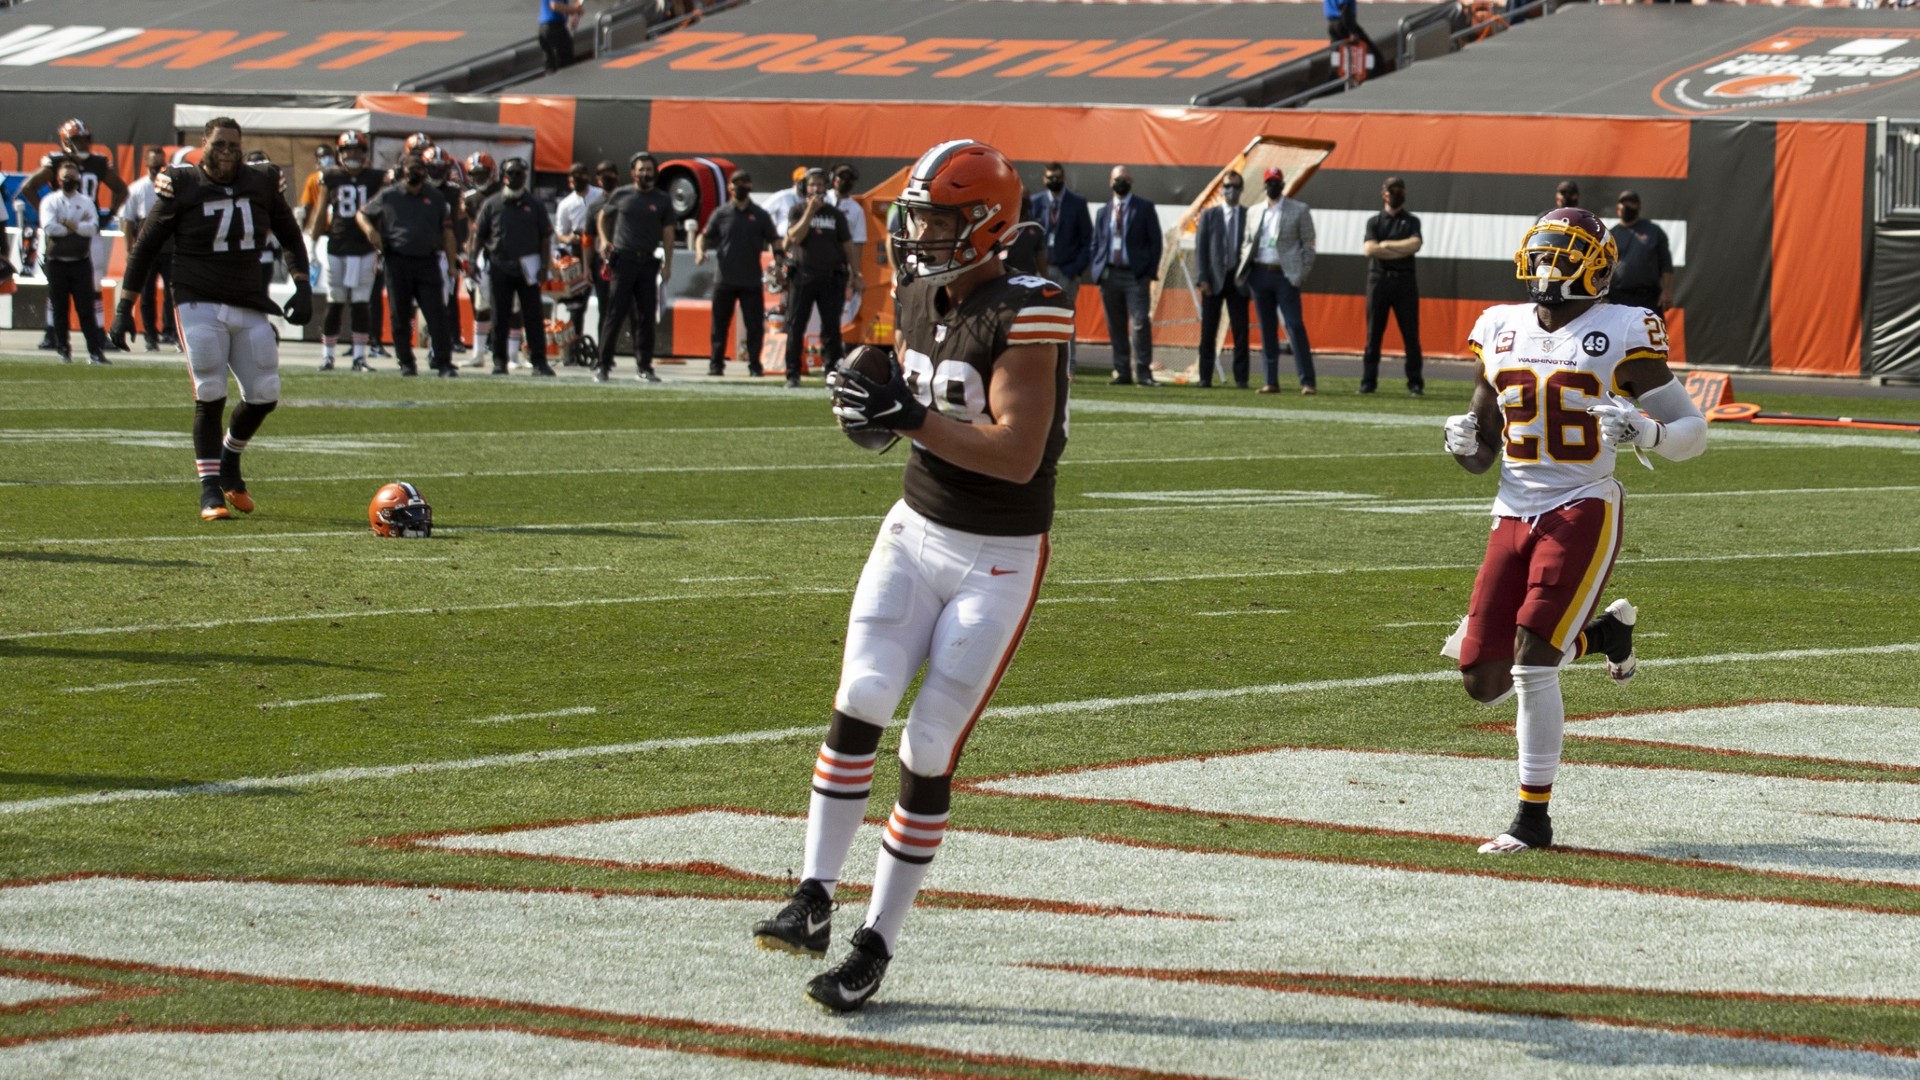 Washington Helped the Browns Accomplish Something They Haven't Done Since 2014